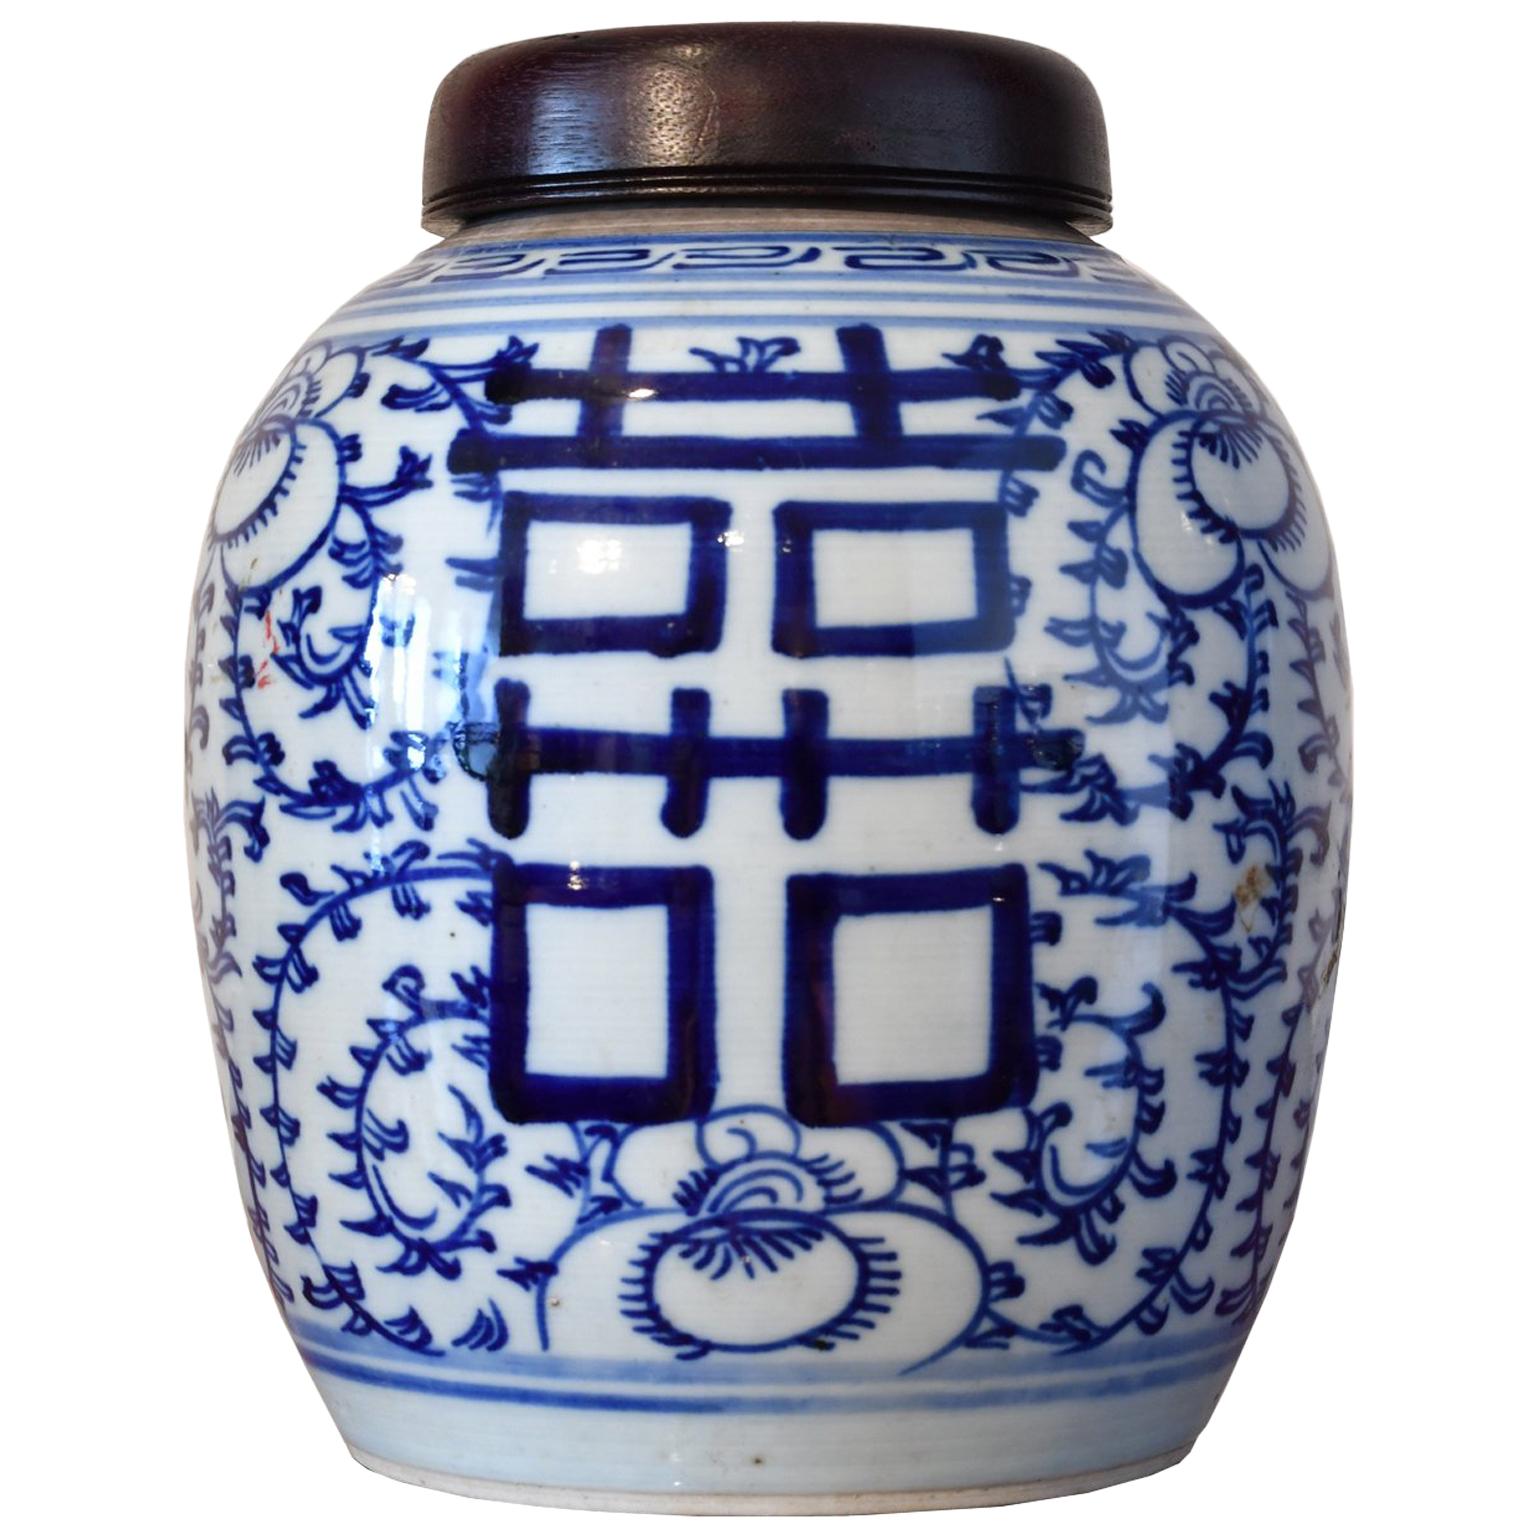 Qing Chinese Porcelain Blue and White Shuang-xi Jar with Double Happiness